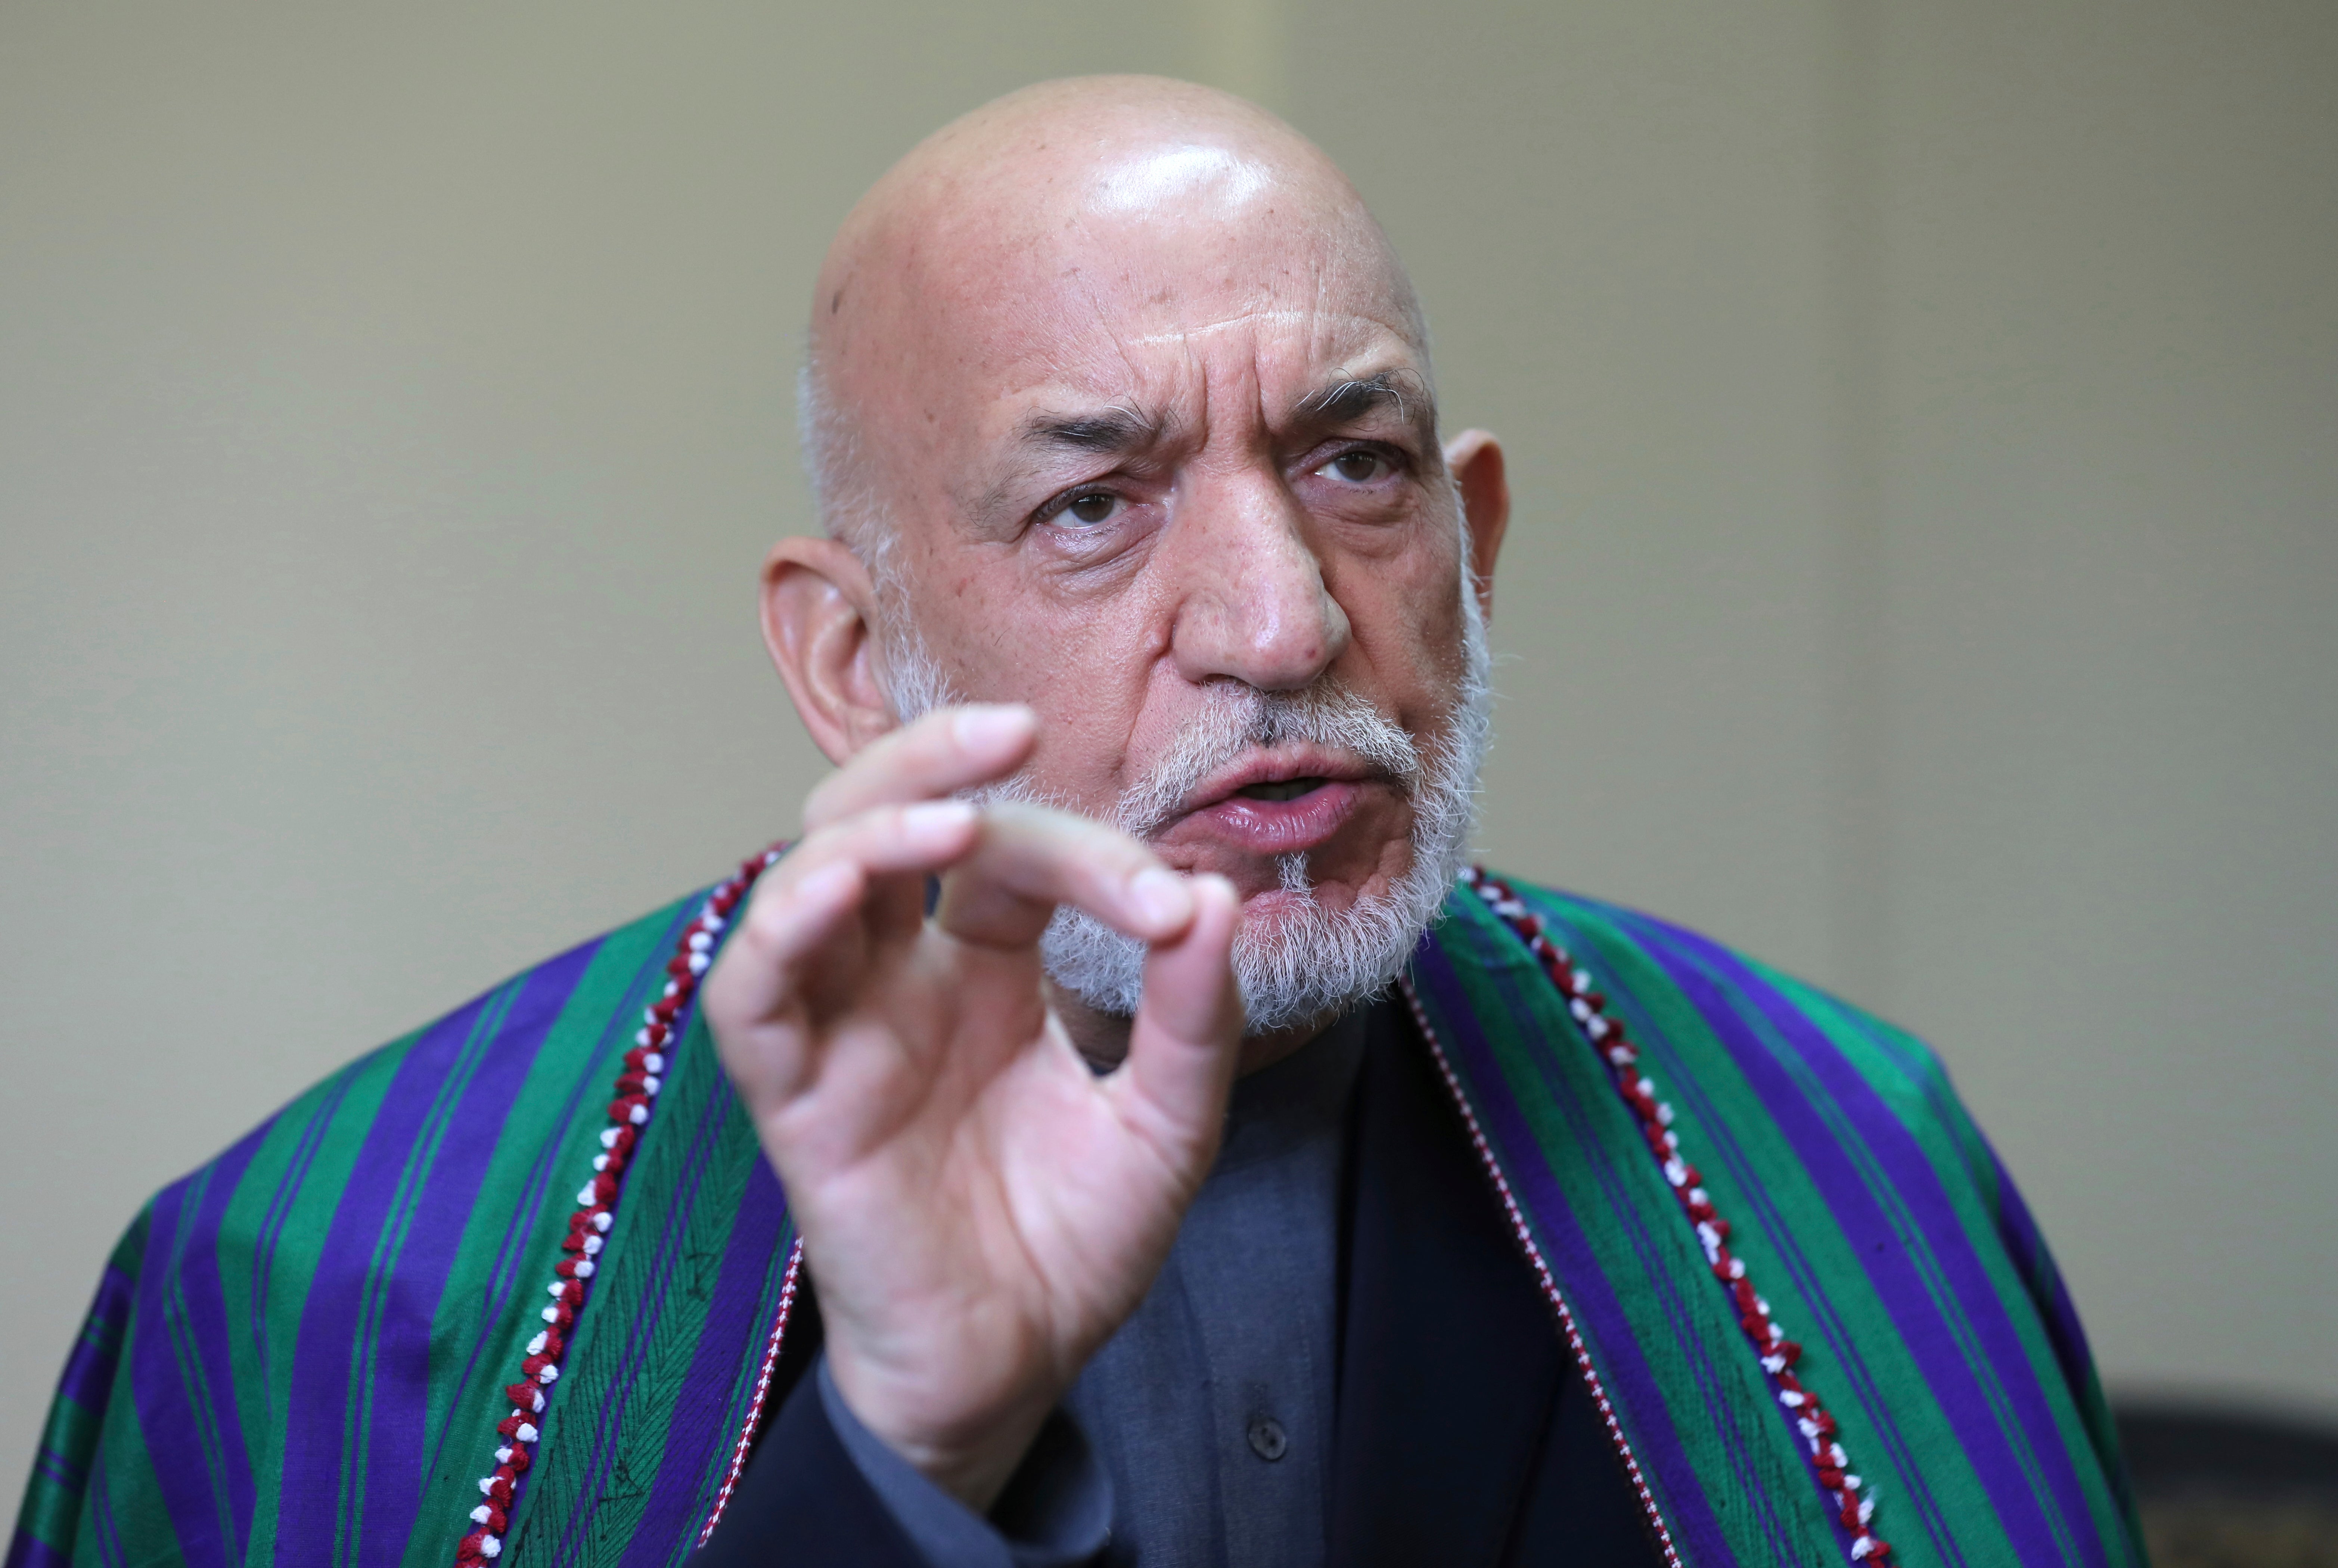 Karzai was president of Afghanistan for 13 years